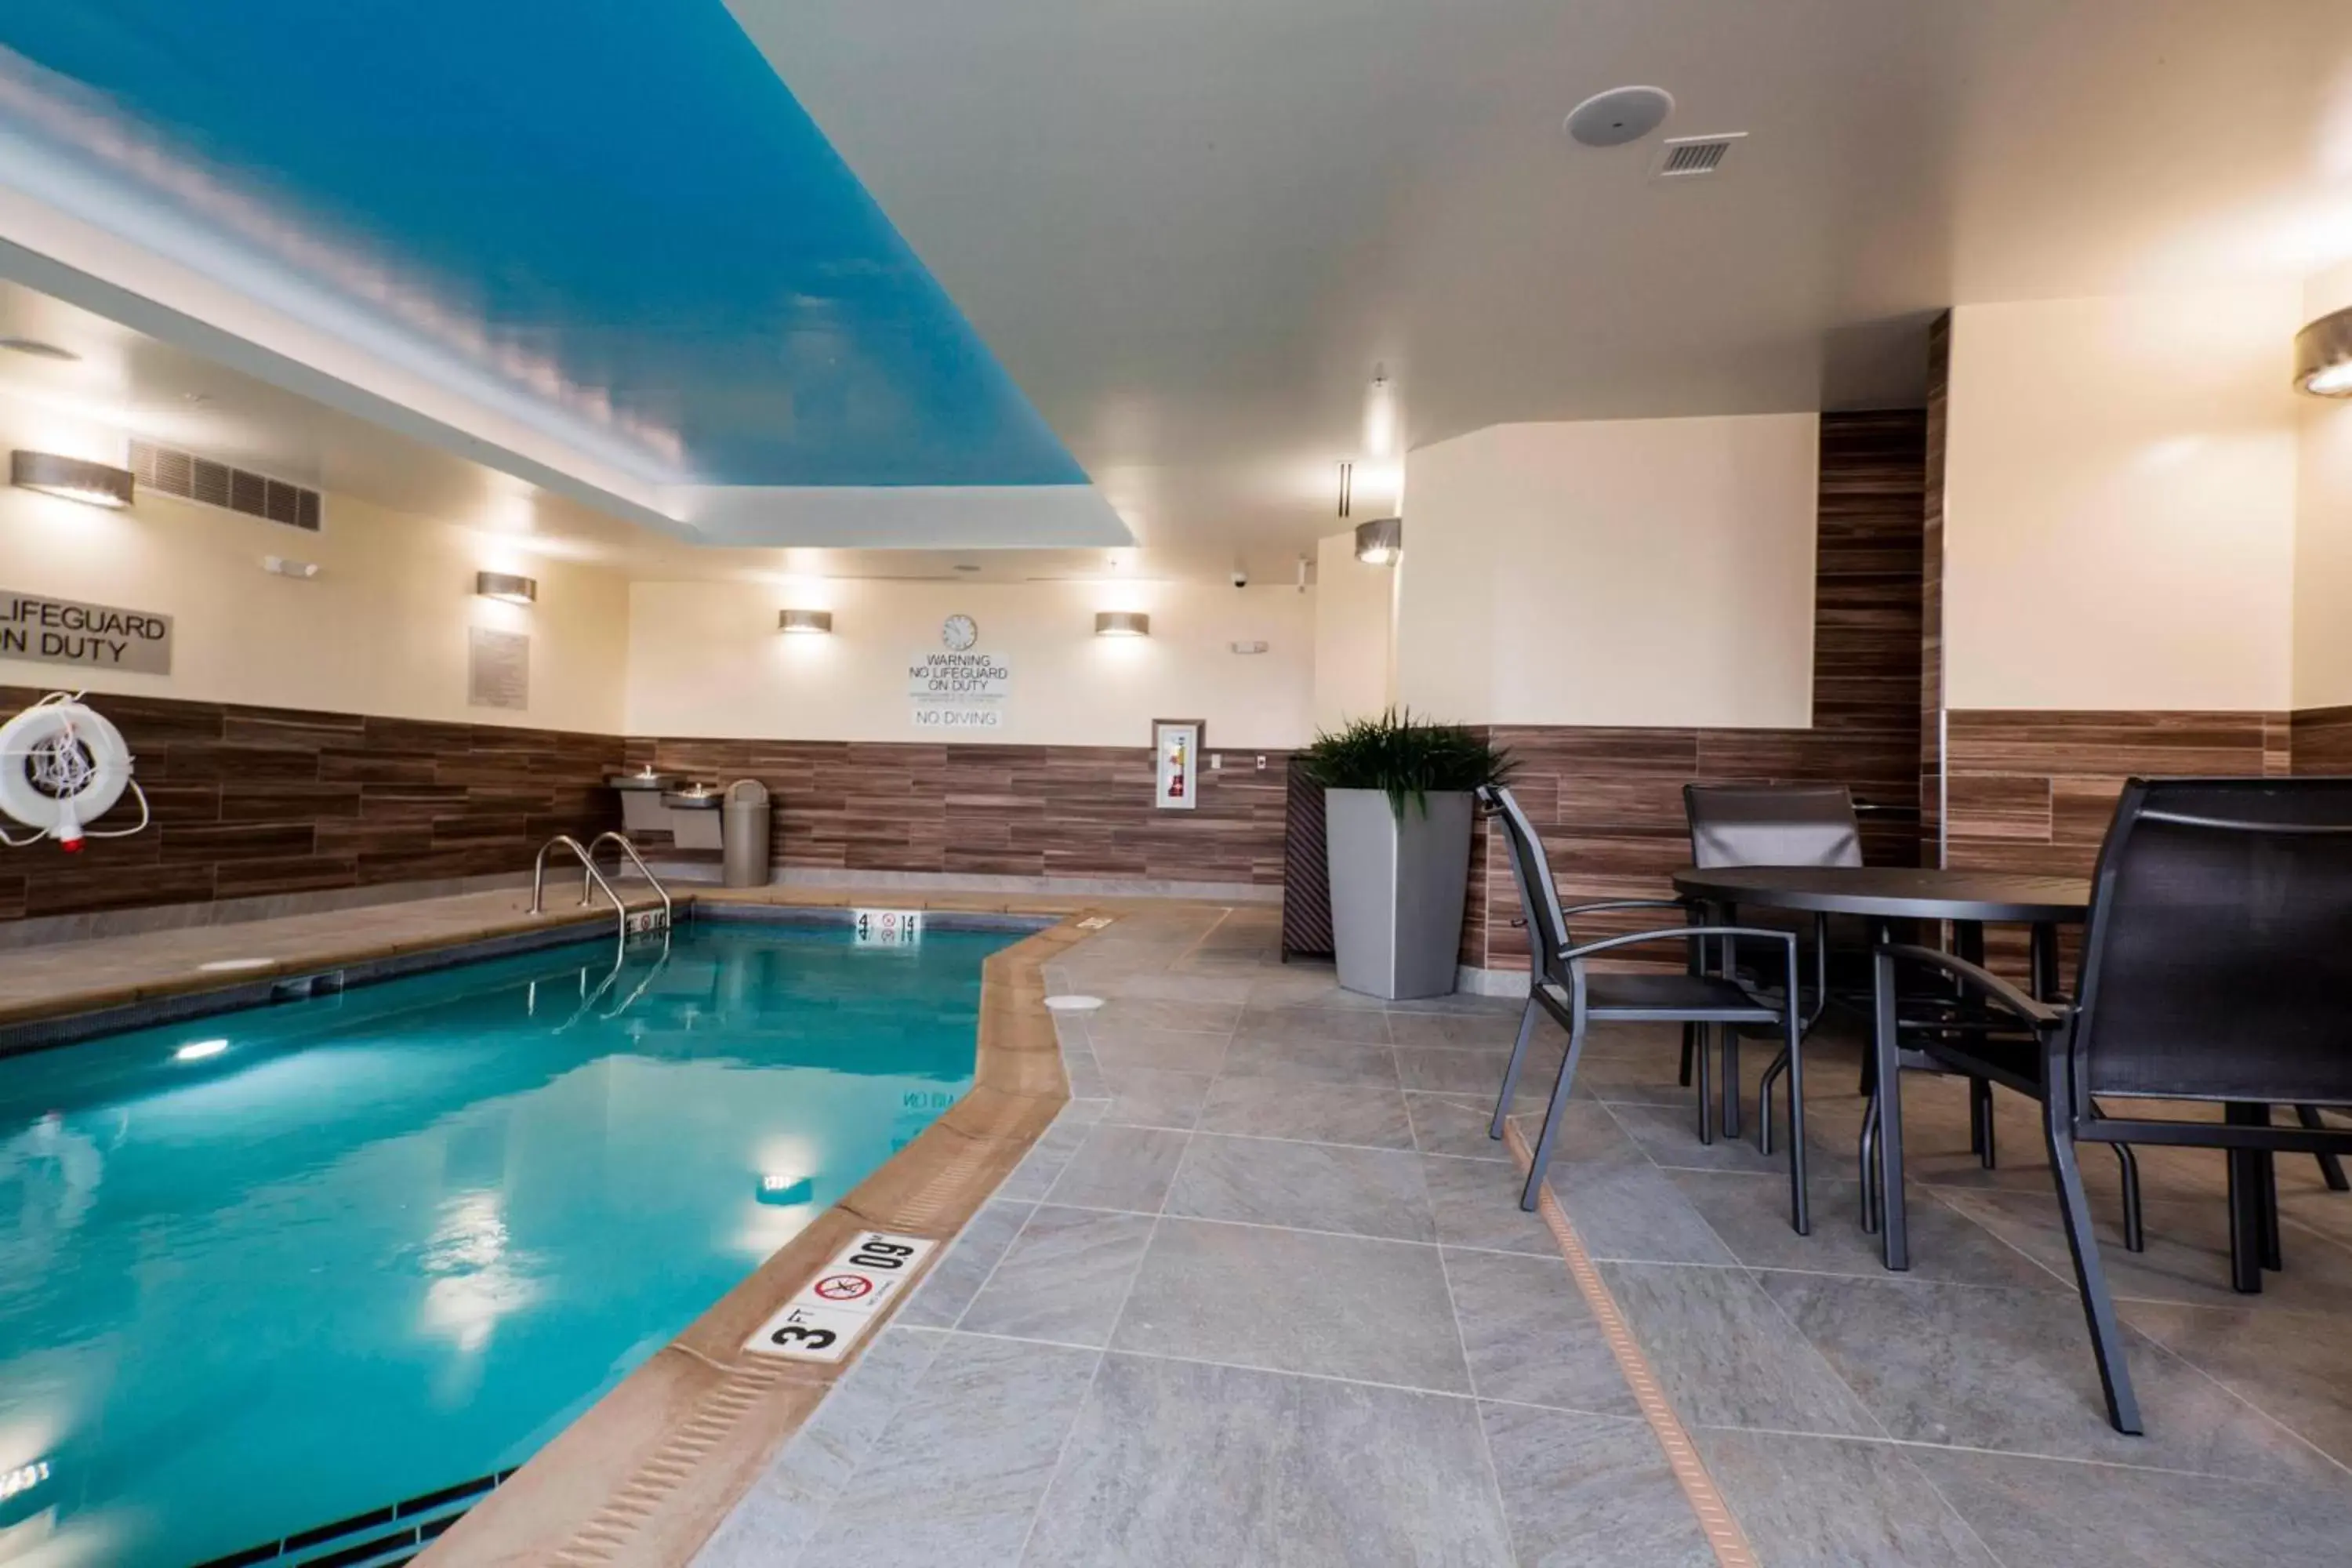 Swimming Pool in Fairfield Inn & Suites by Marriott Chillicothe